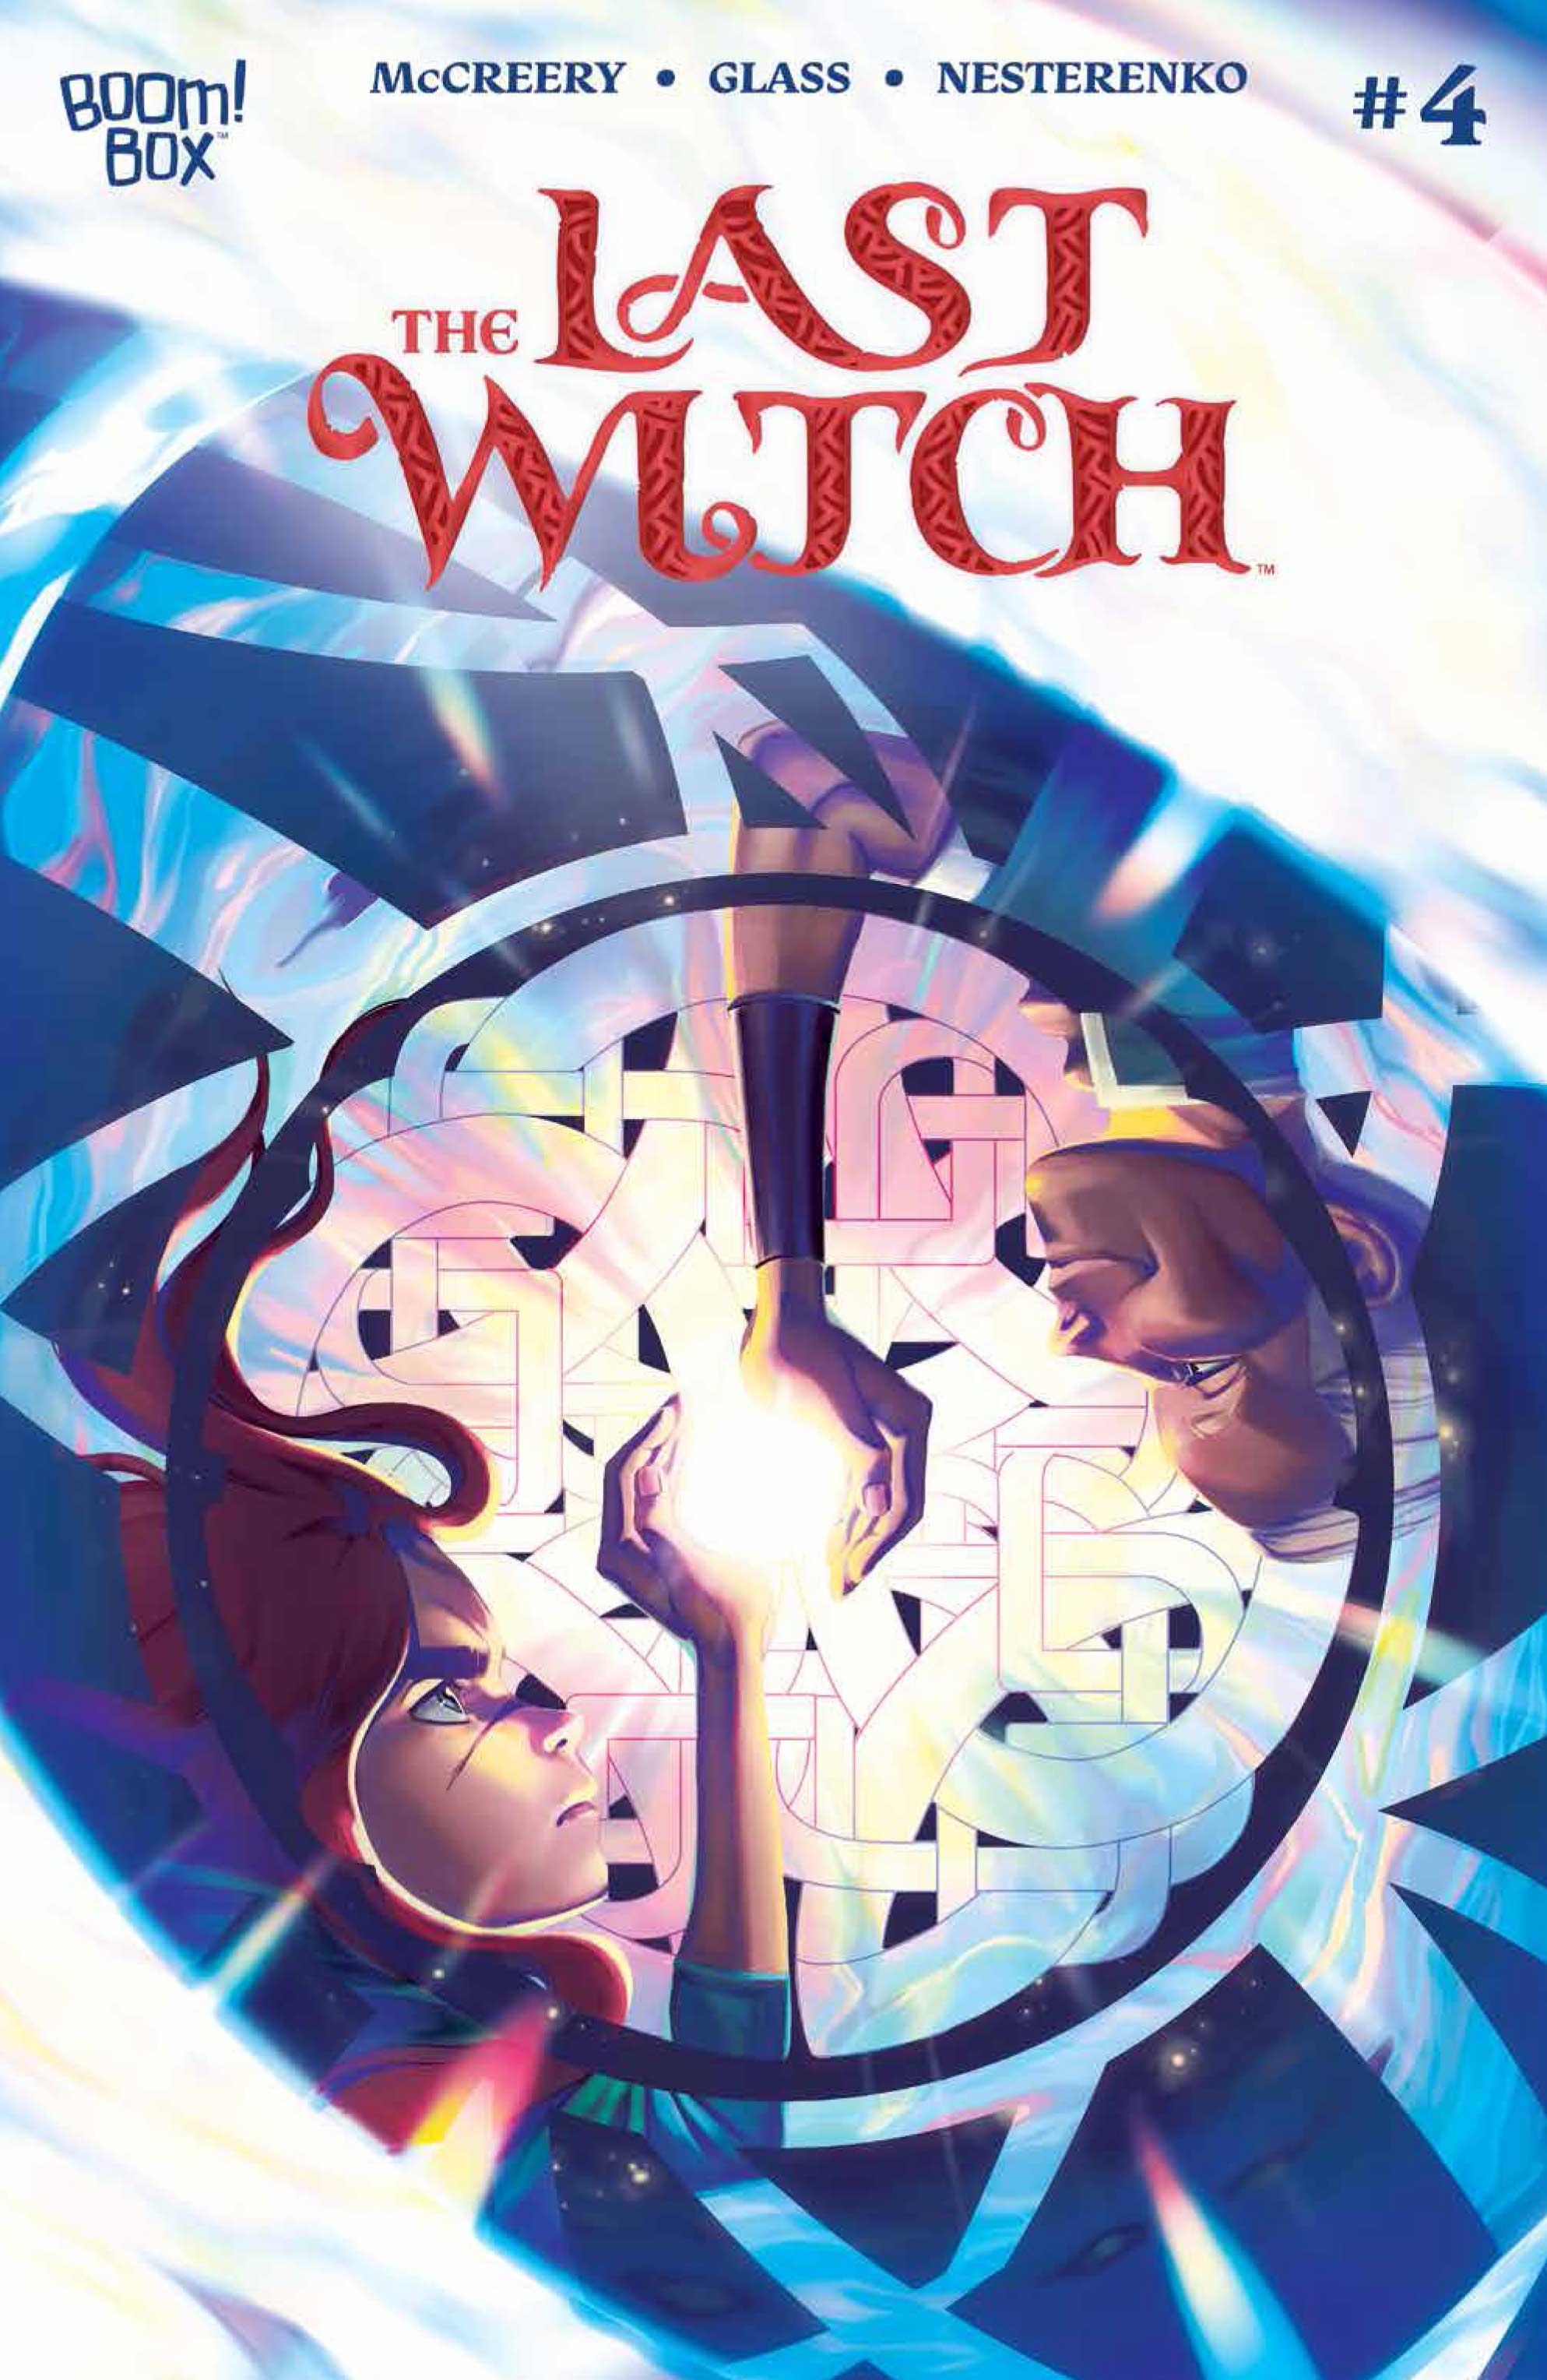 Last Witch #4 Cover A Glass